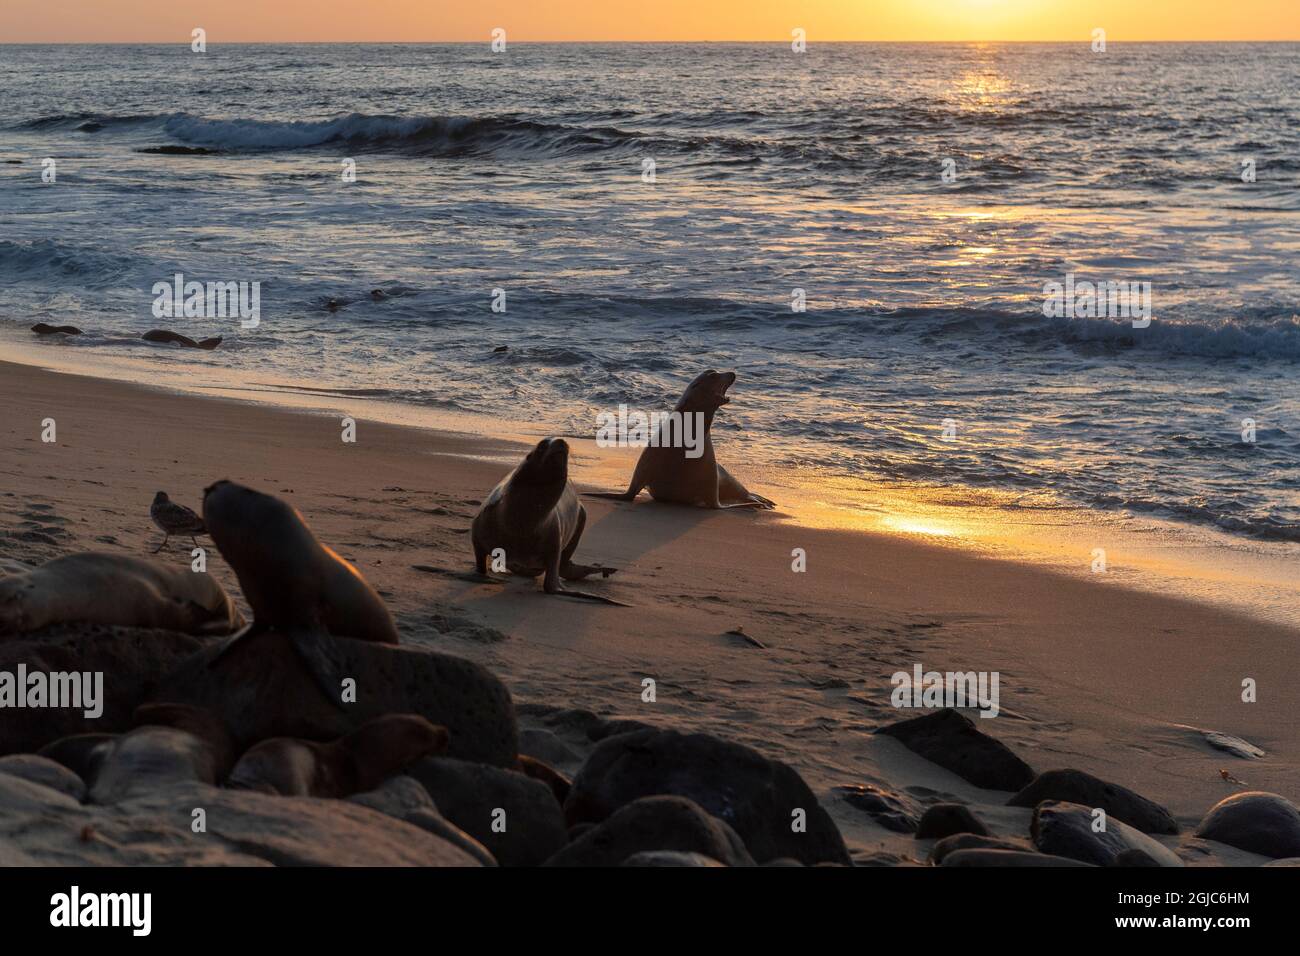 Sea lion bellowing coming out of the water on the beach at sunset Stock Photo